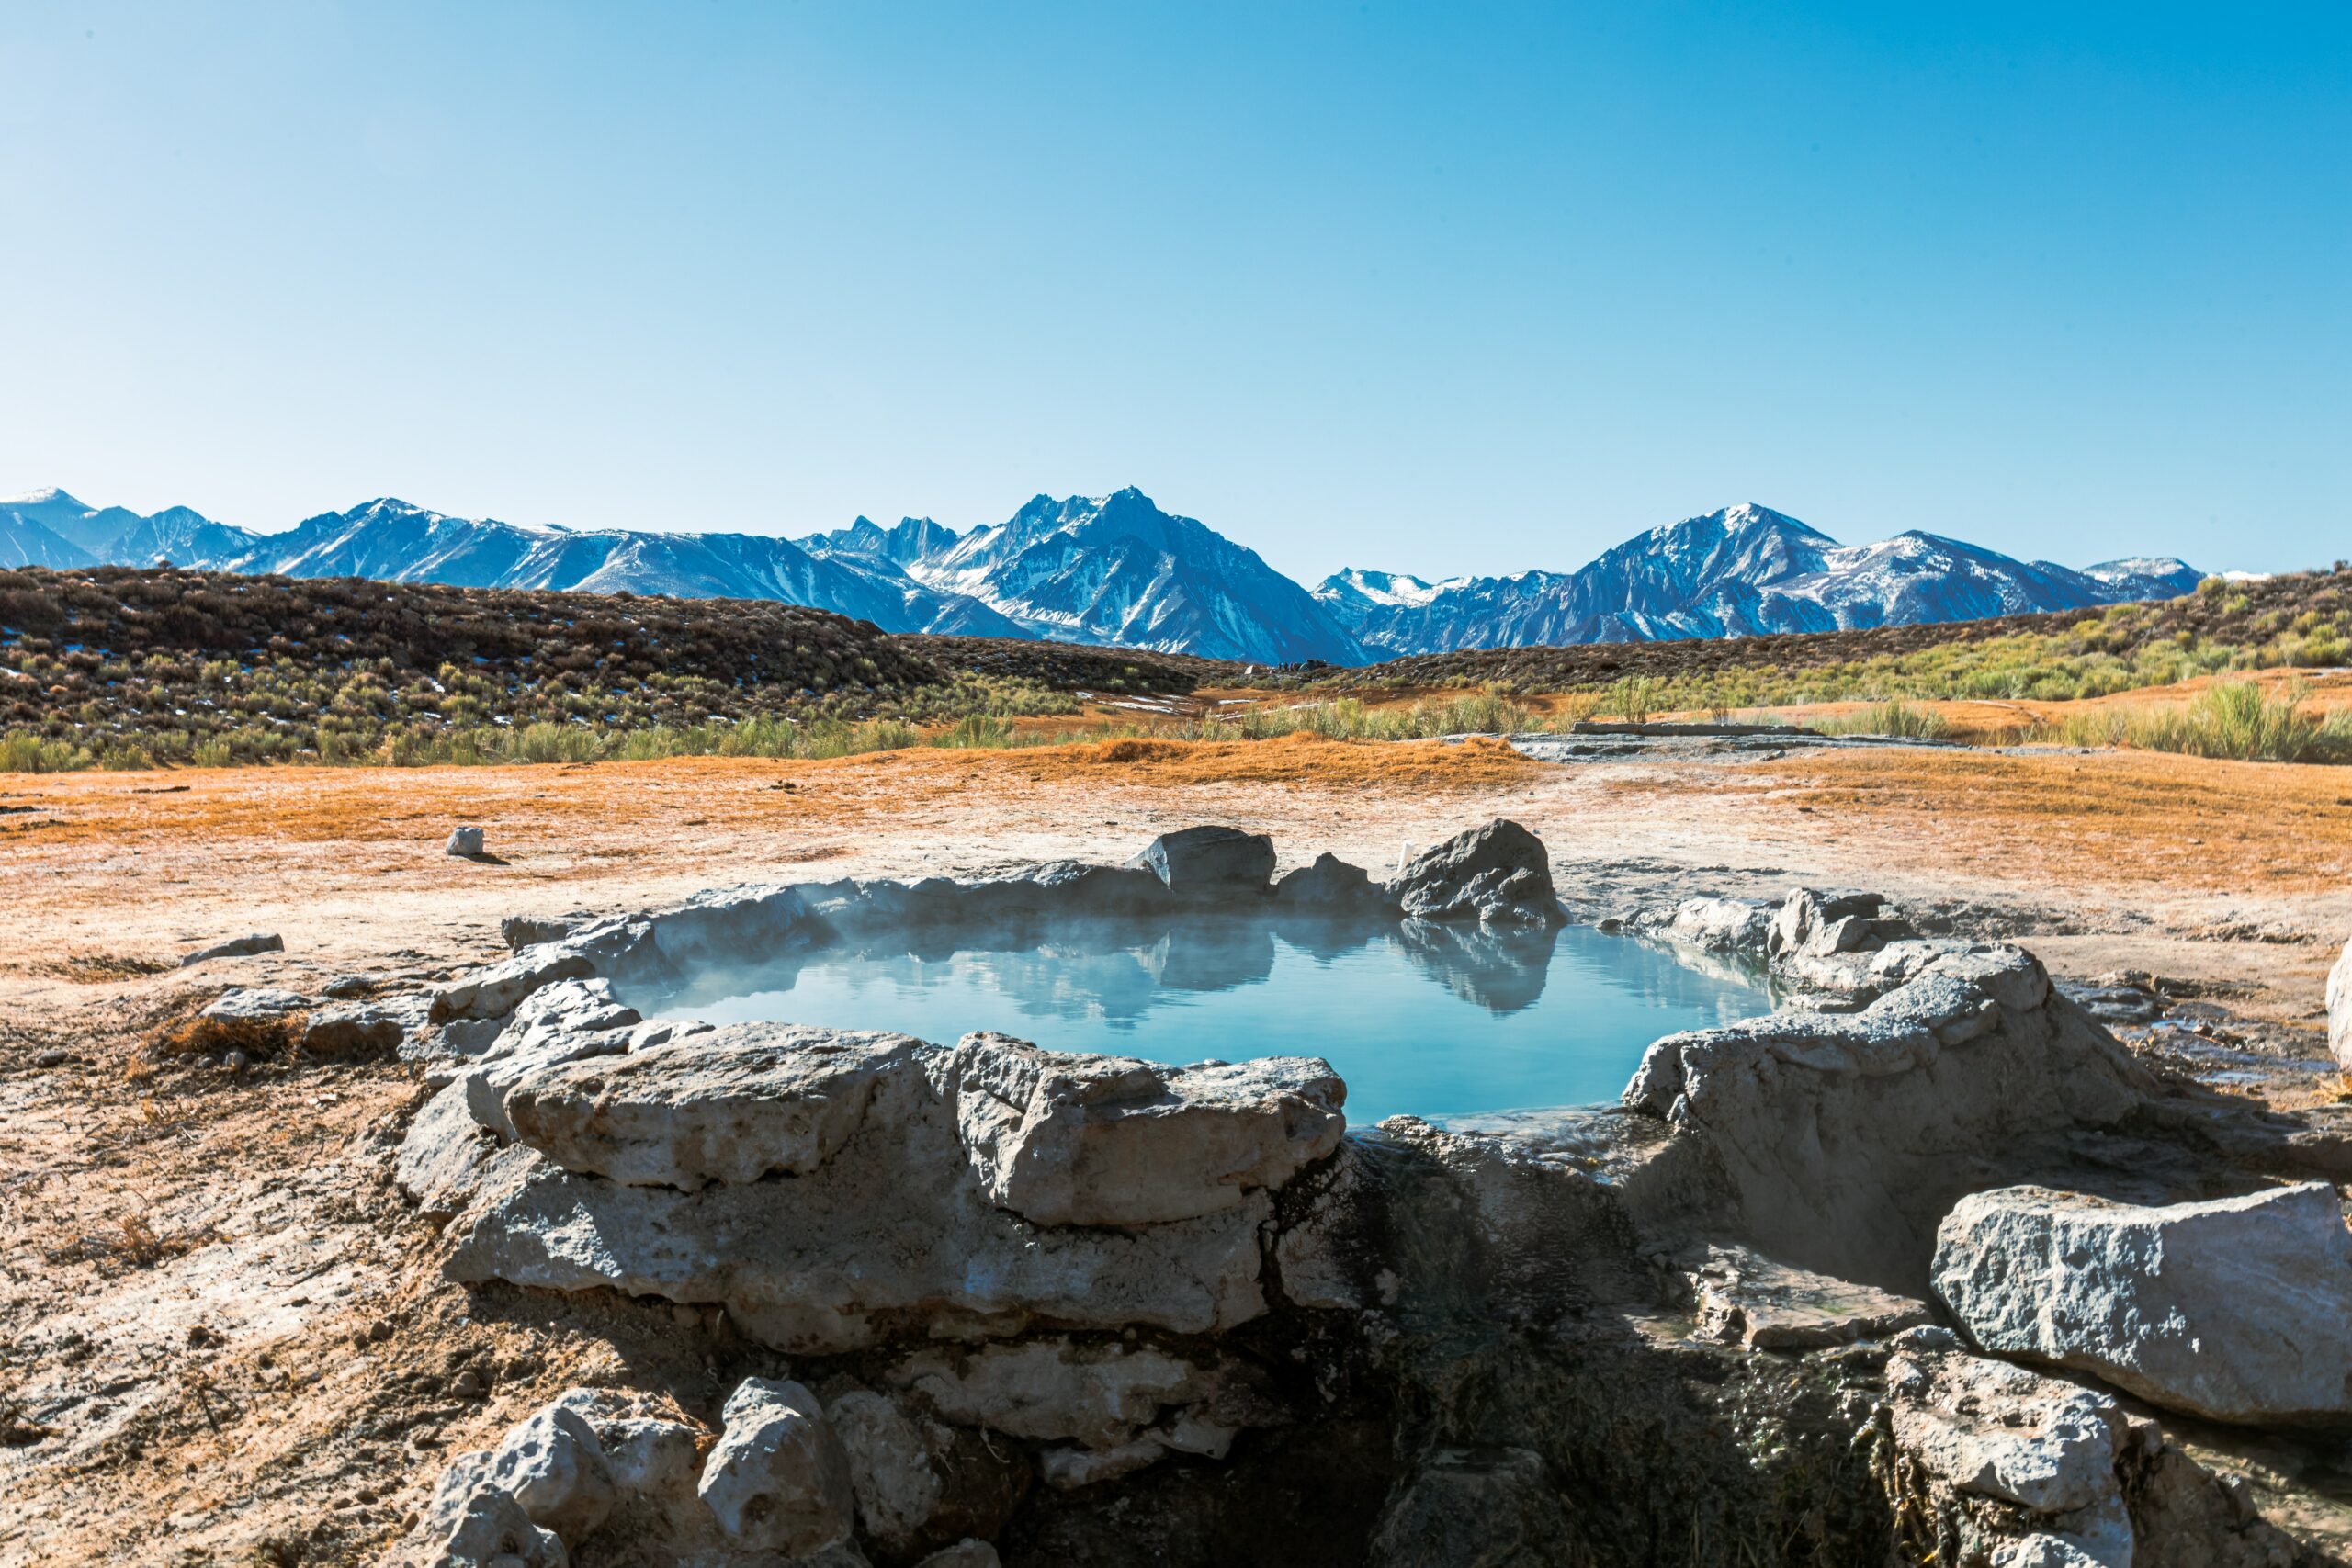 Captivating photo of a barren land with a small pond and a scenic mountain view.